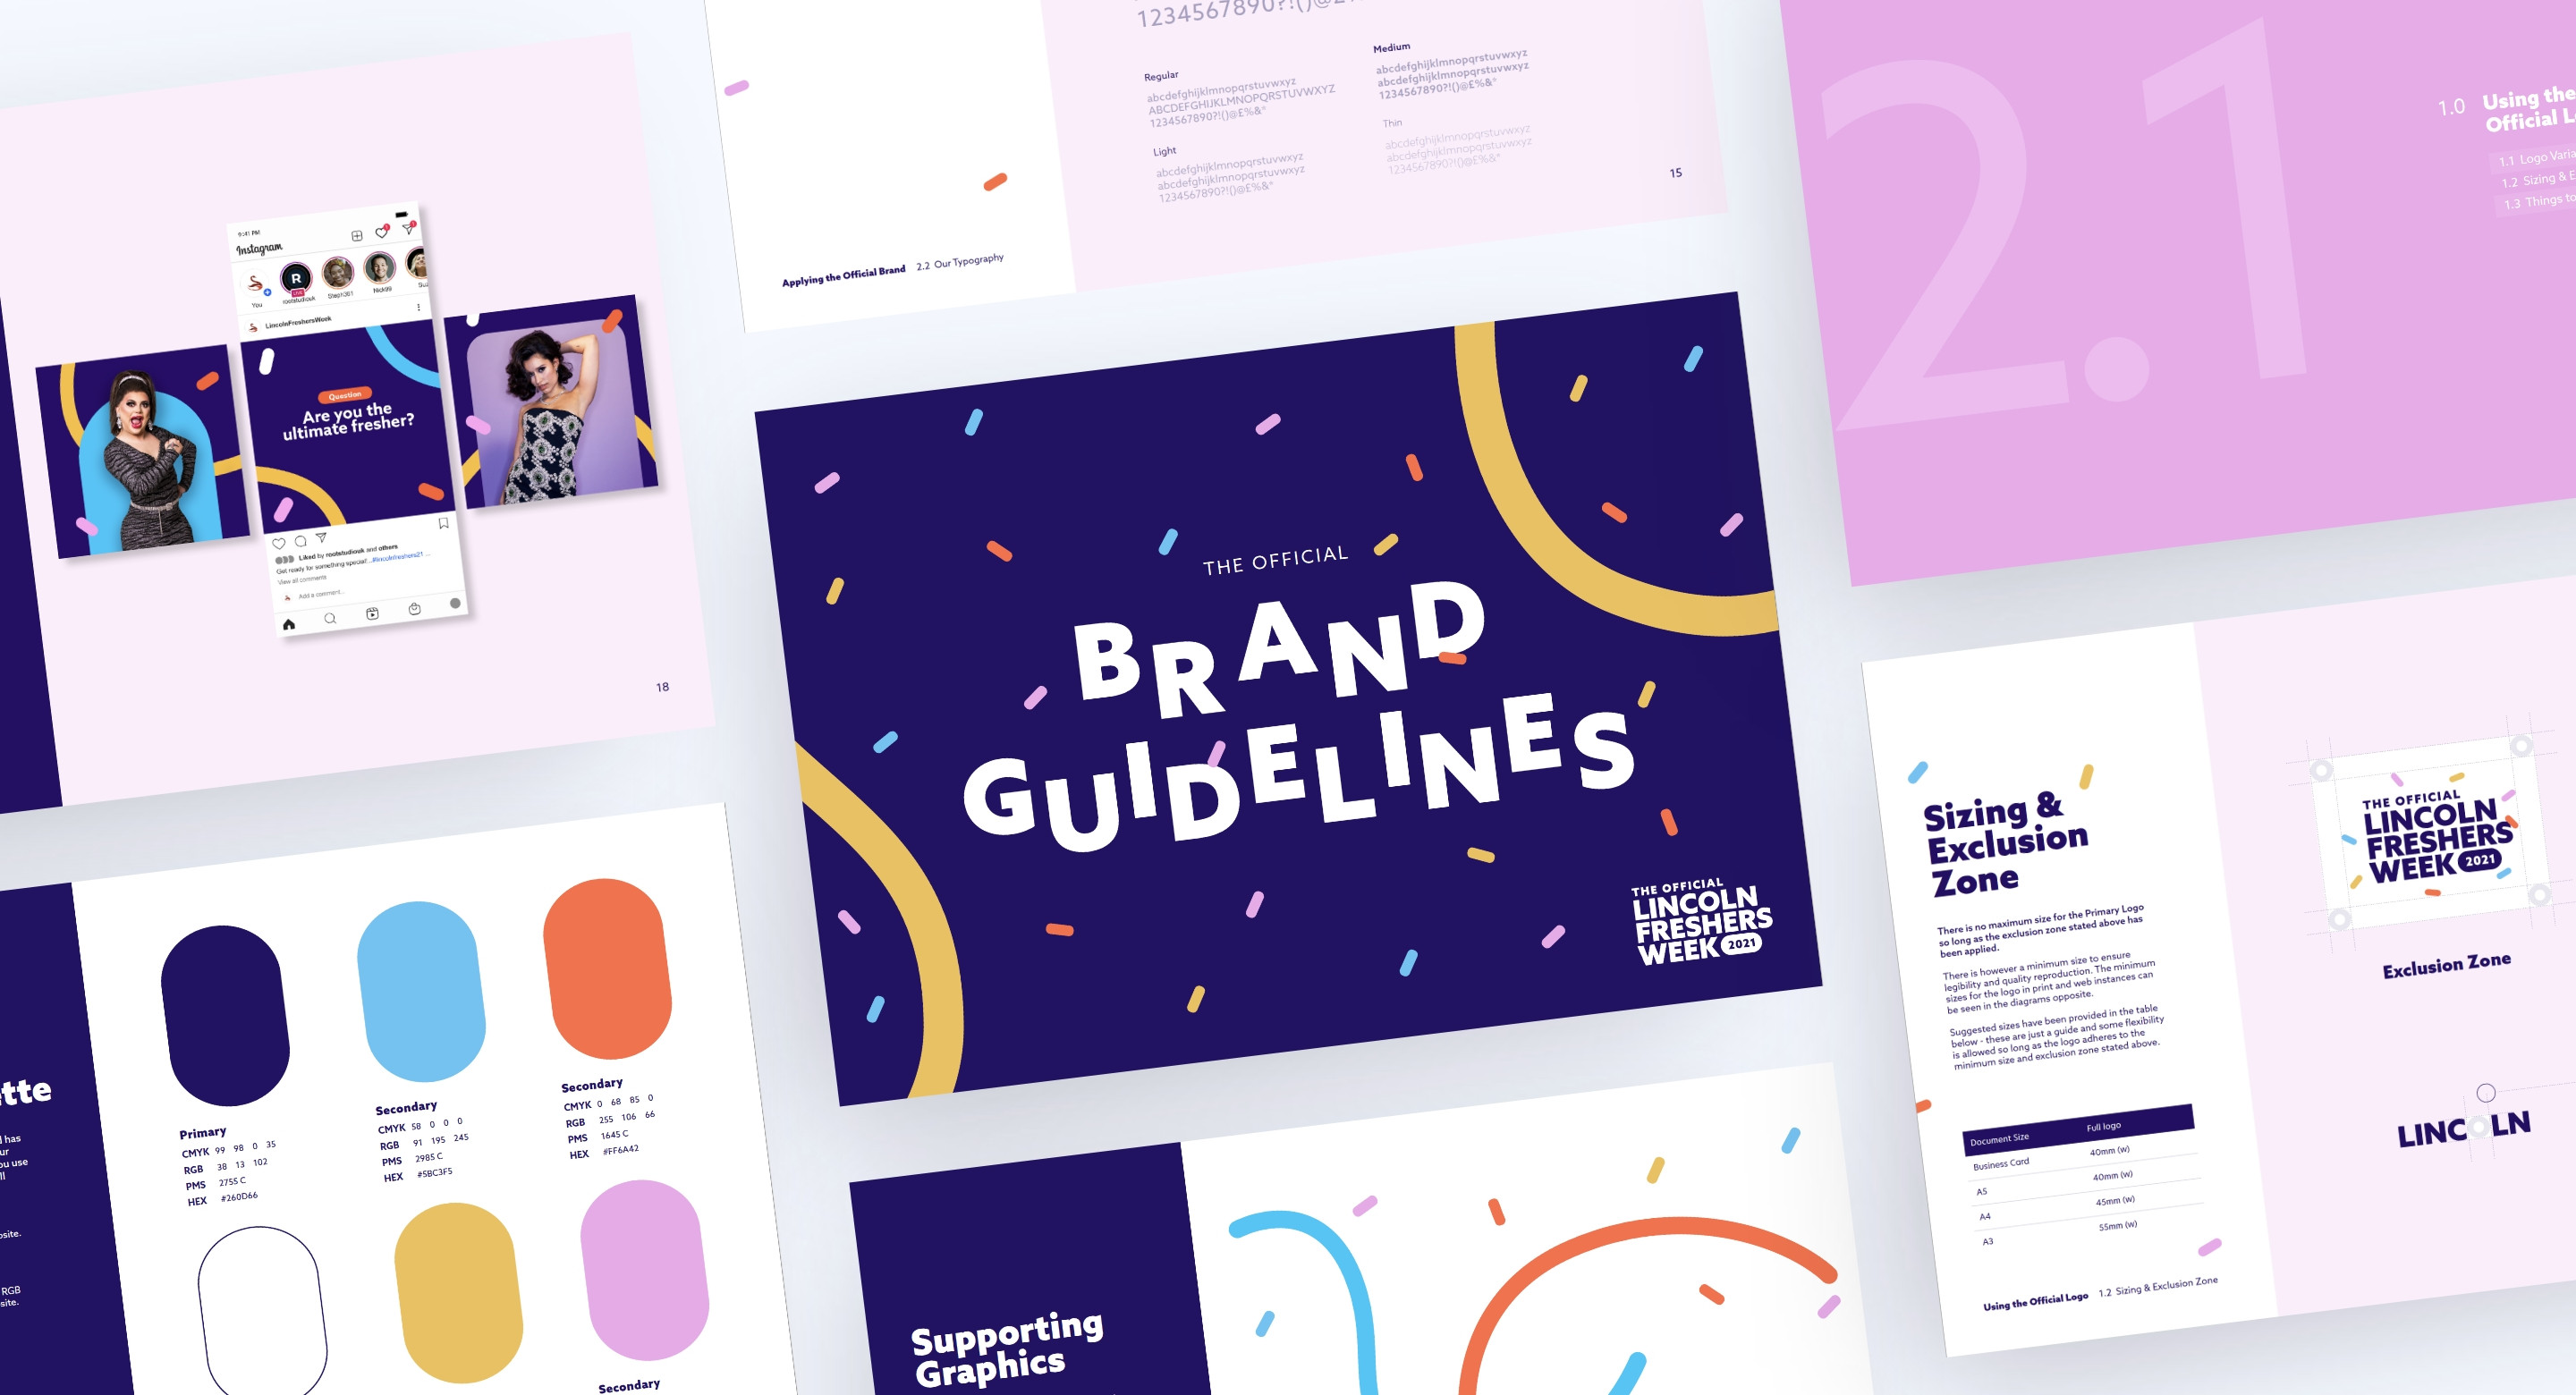 Lincoln Student Union brand guidelines design by Root Studio